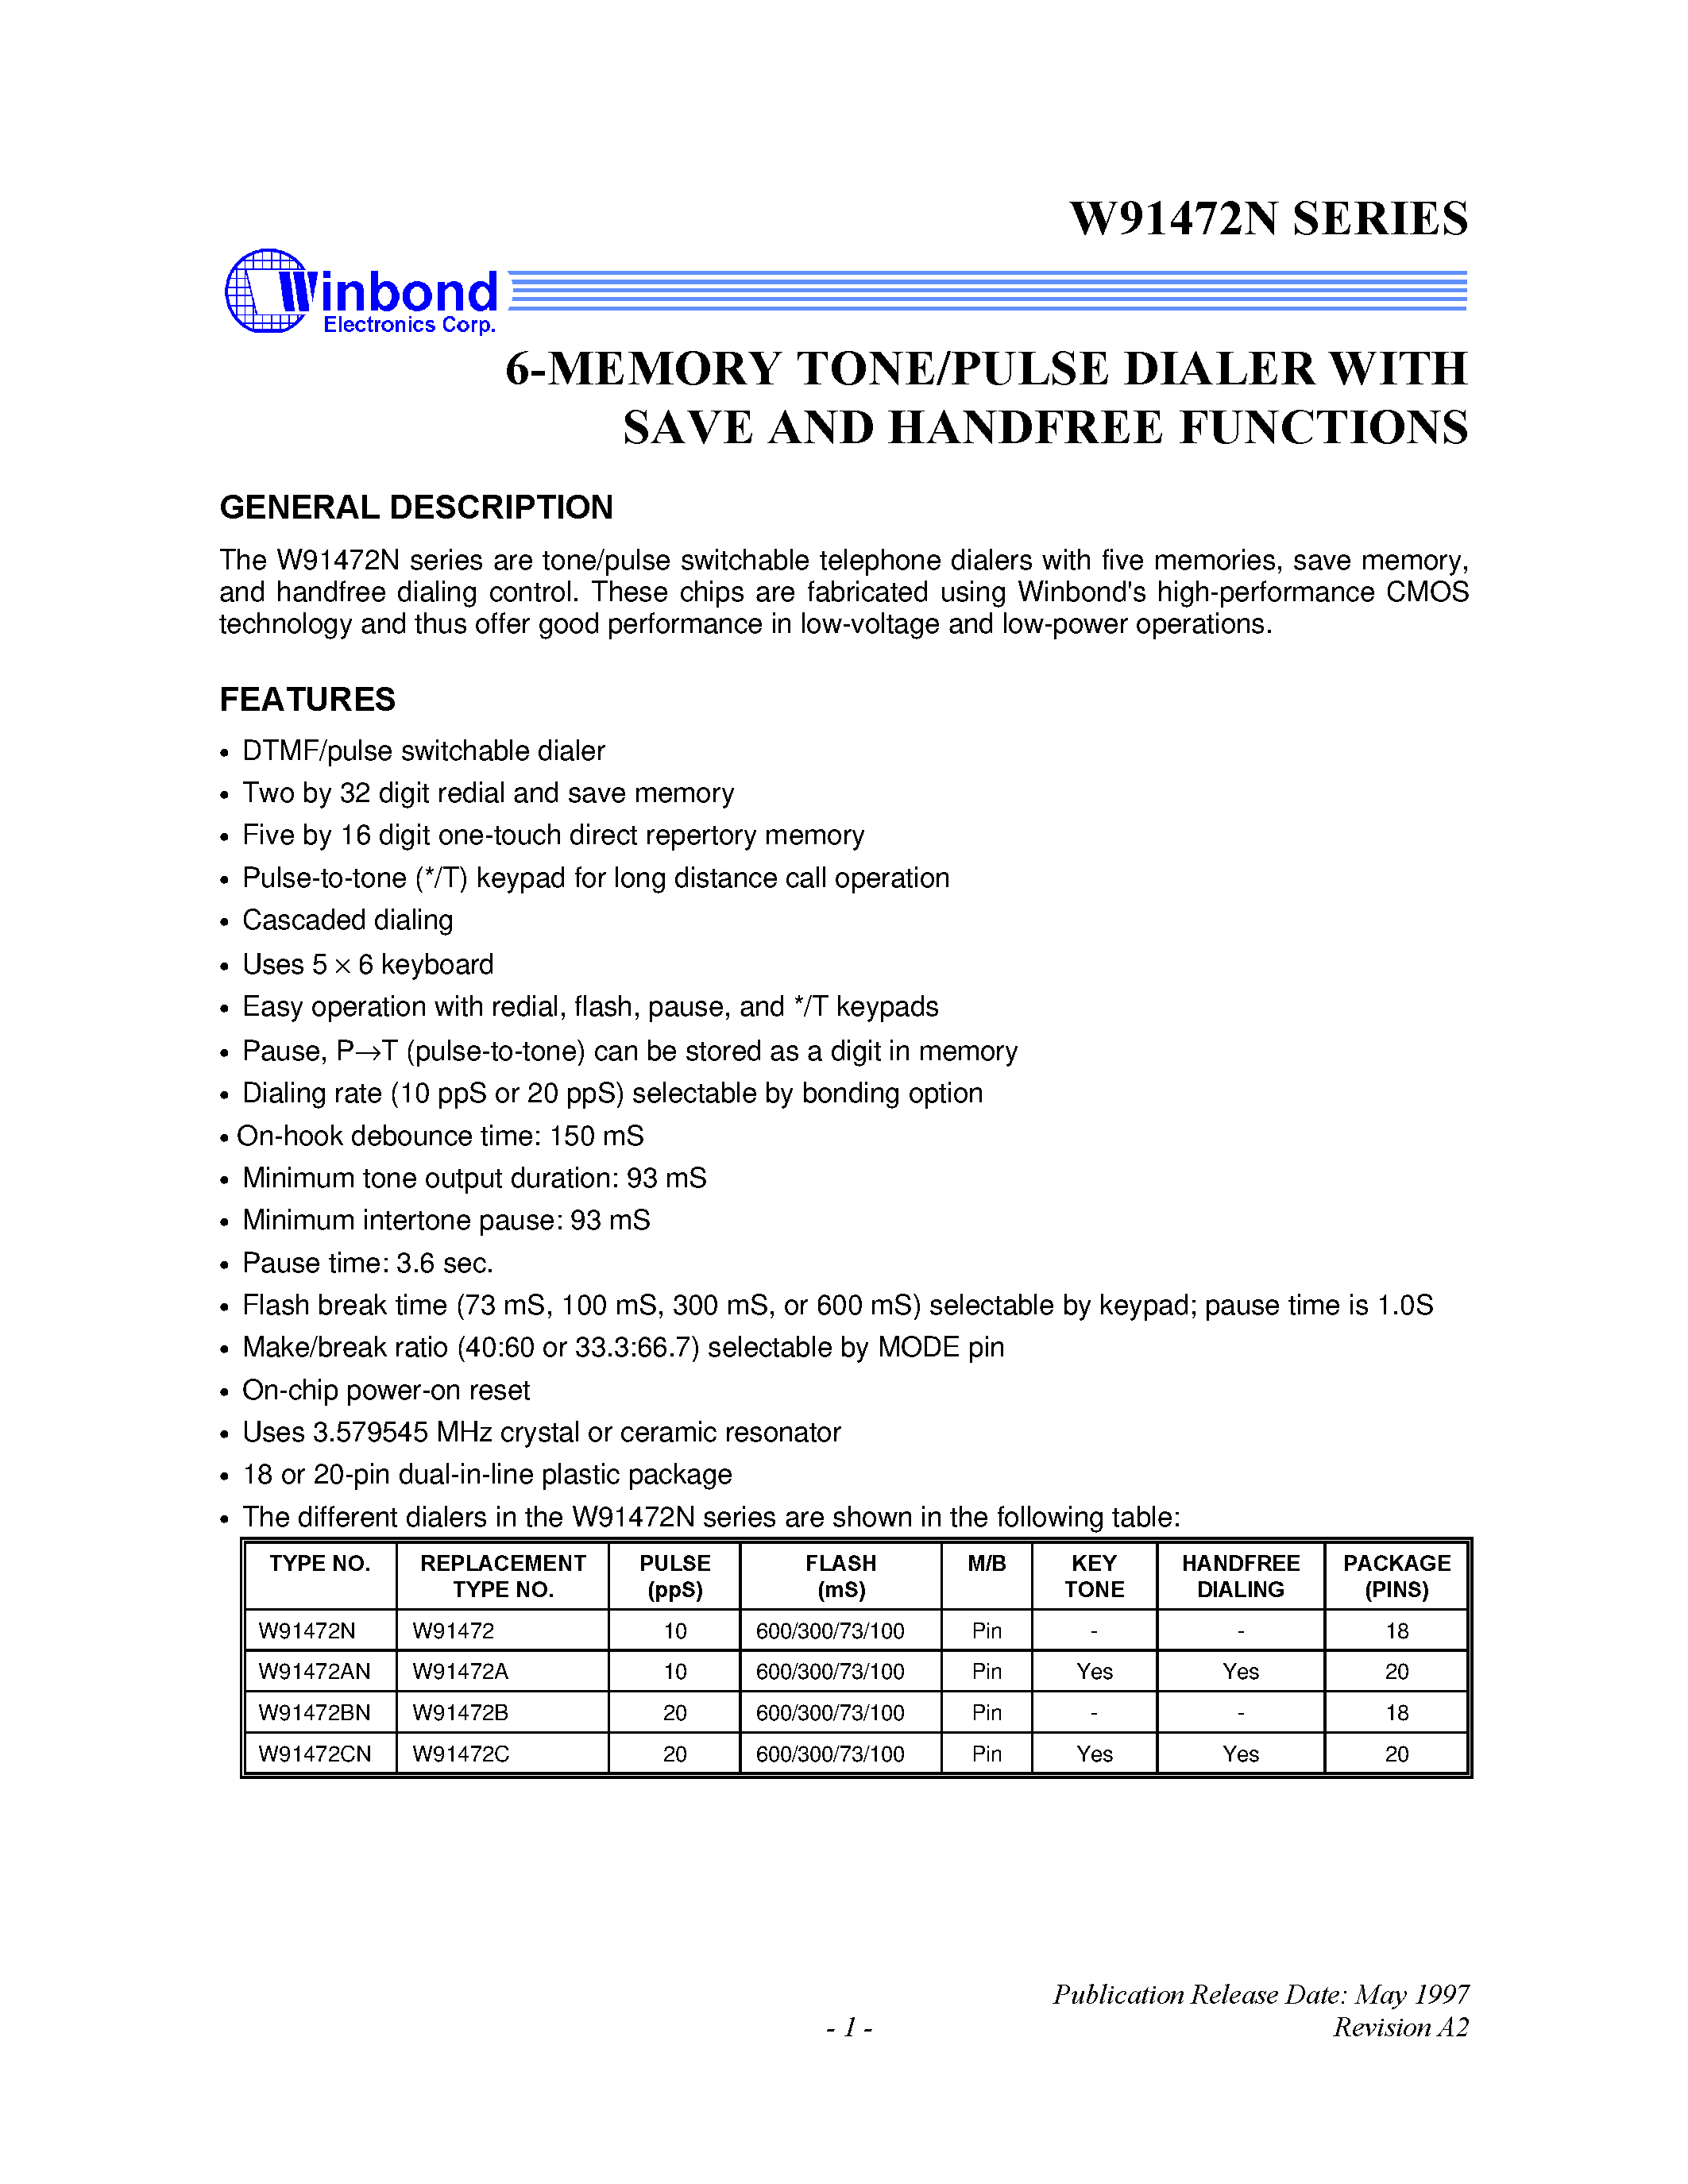 Datasheet W91472AN - 6-MEMORY TONE/PULSE DIALER WITH SAVE AND HANDFREE FUNCTION page 1